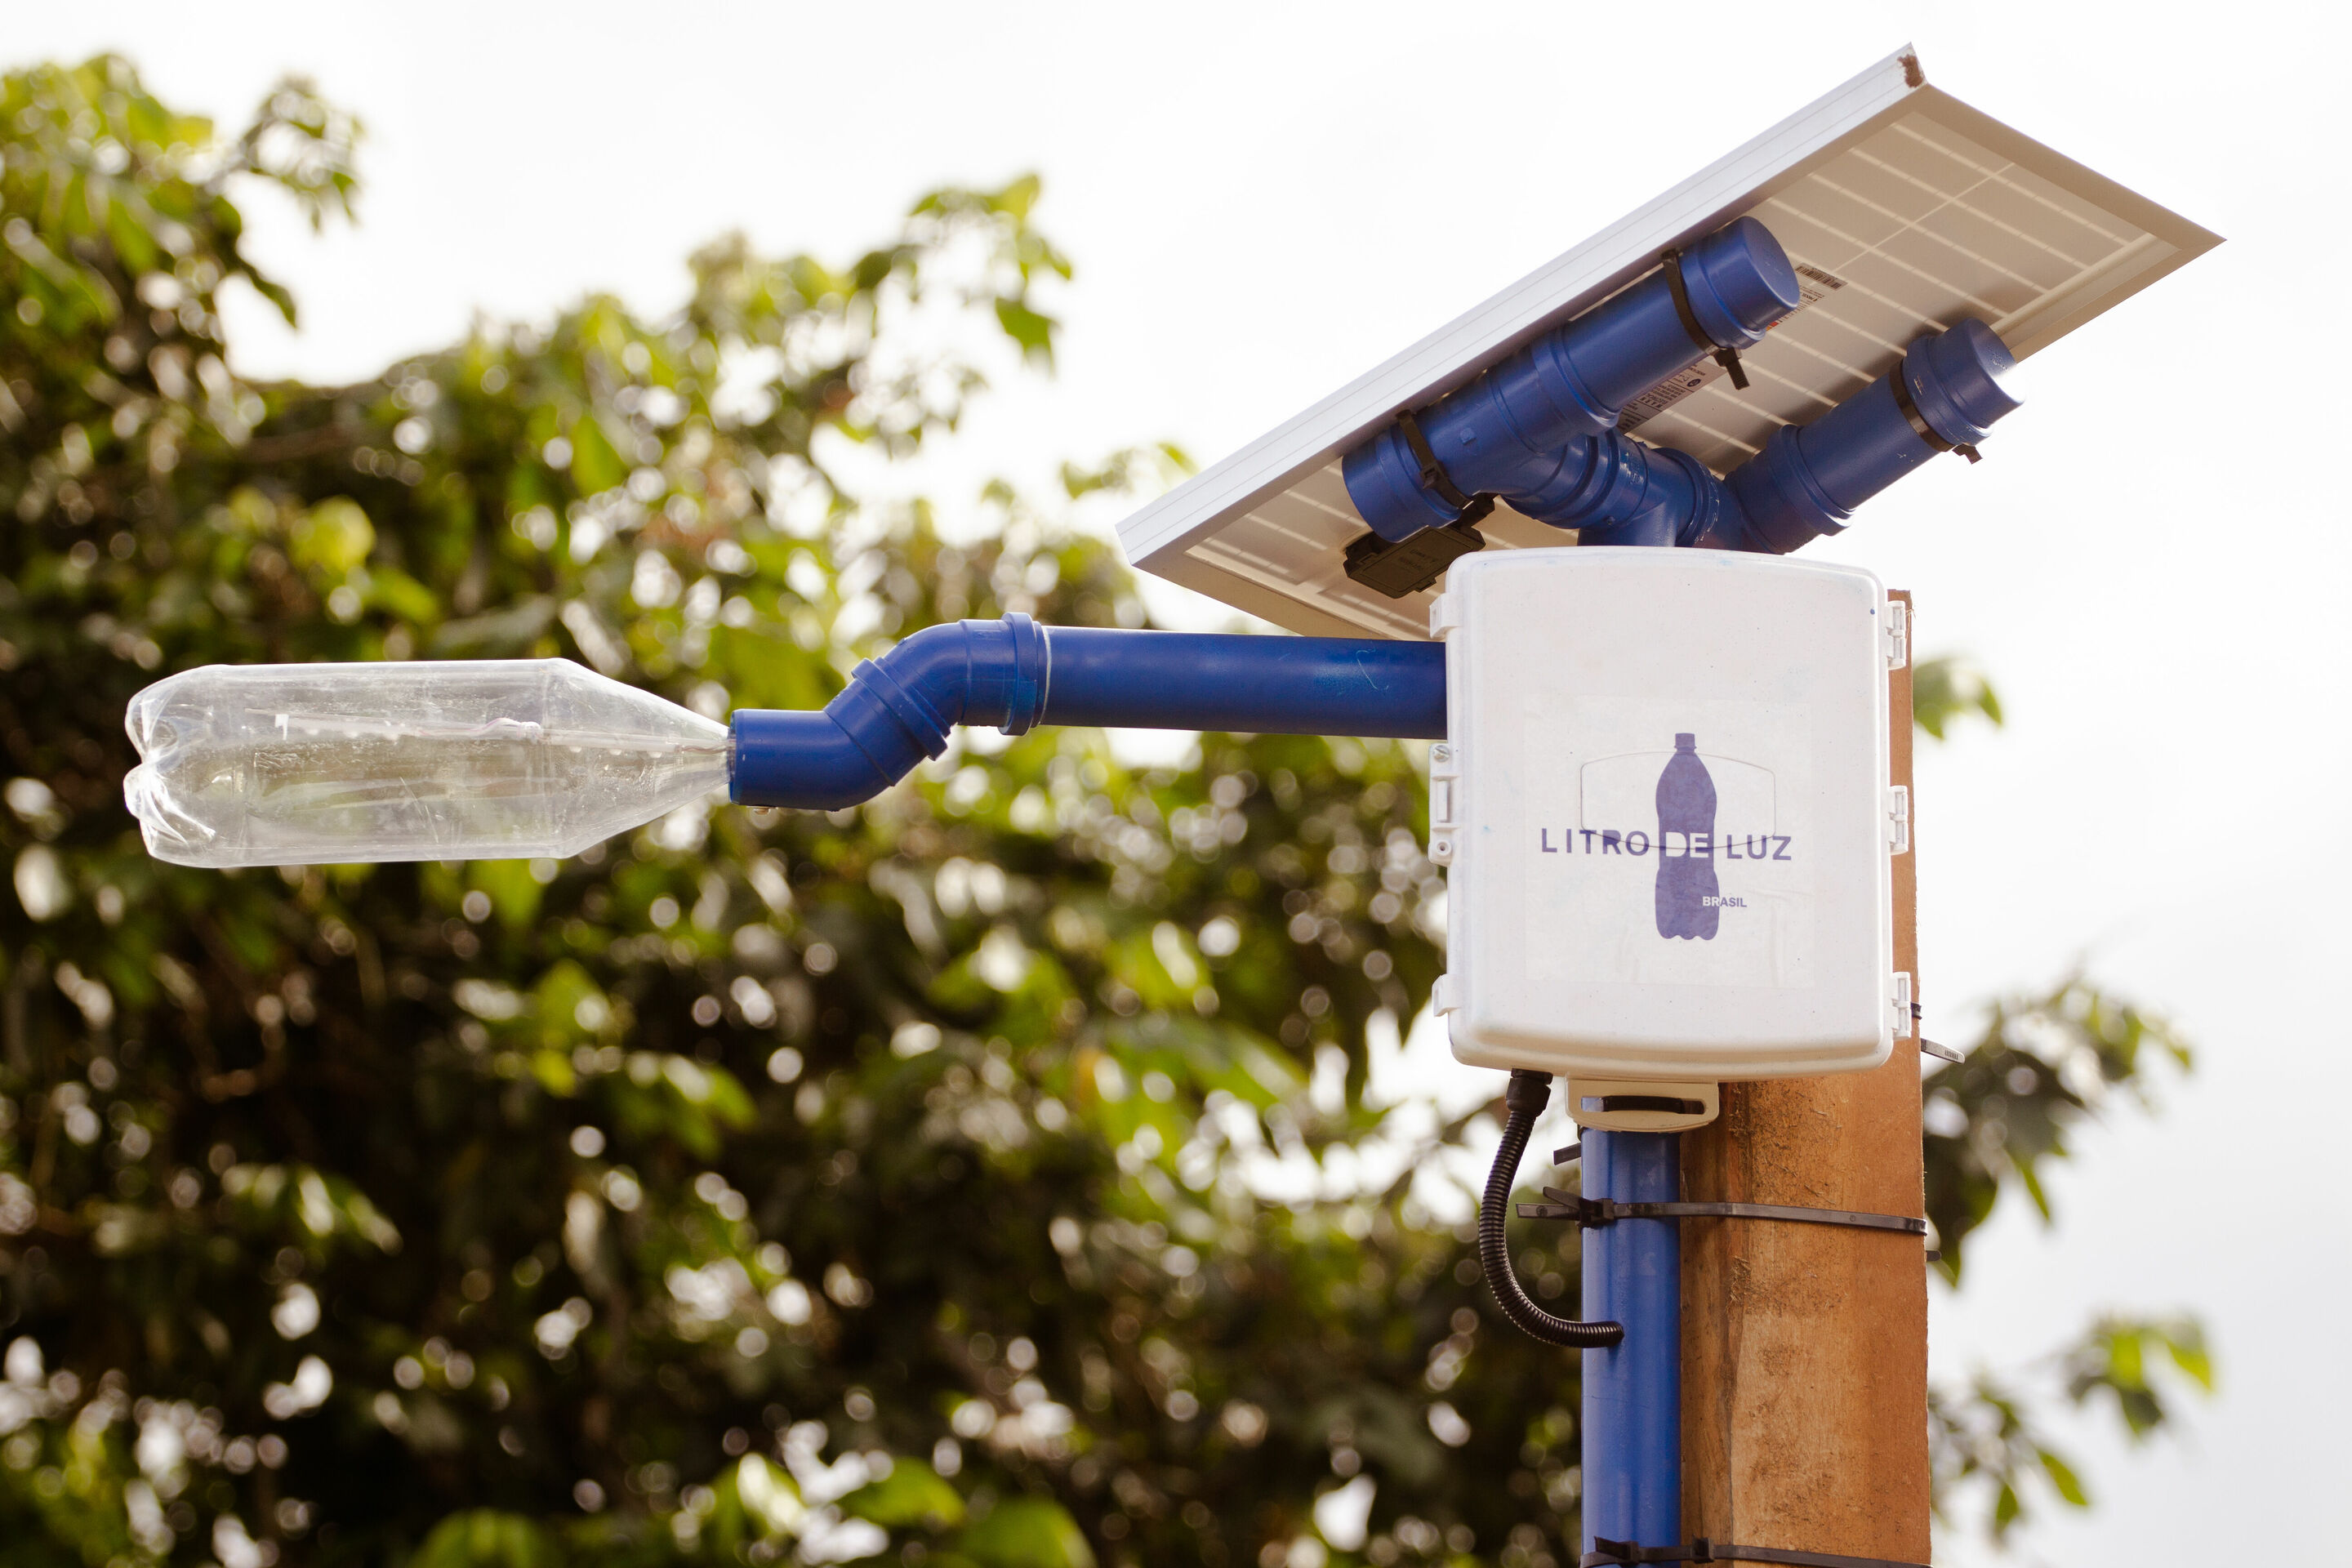 Audi and Litro de Luz install lampposts and solar lamps in Amazonian communities